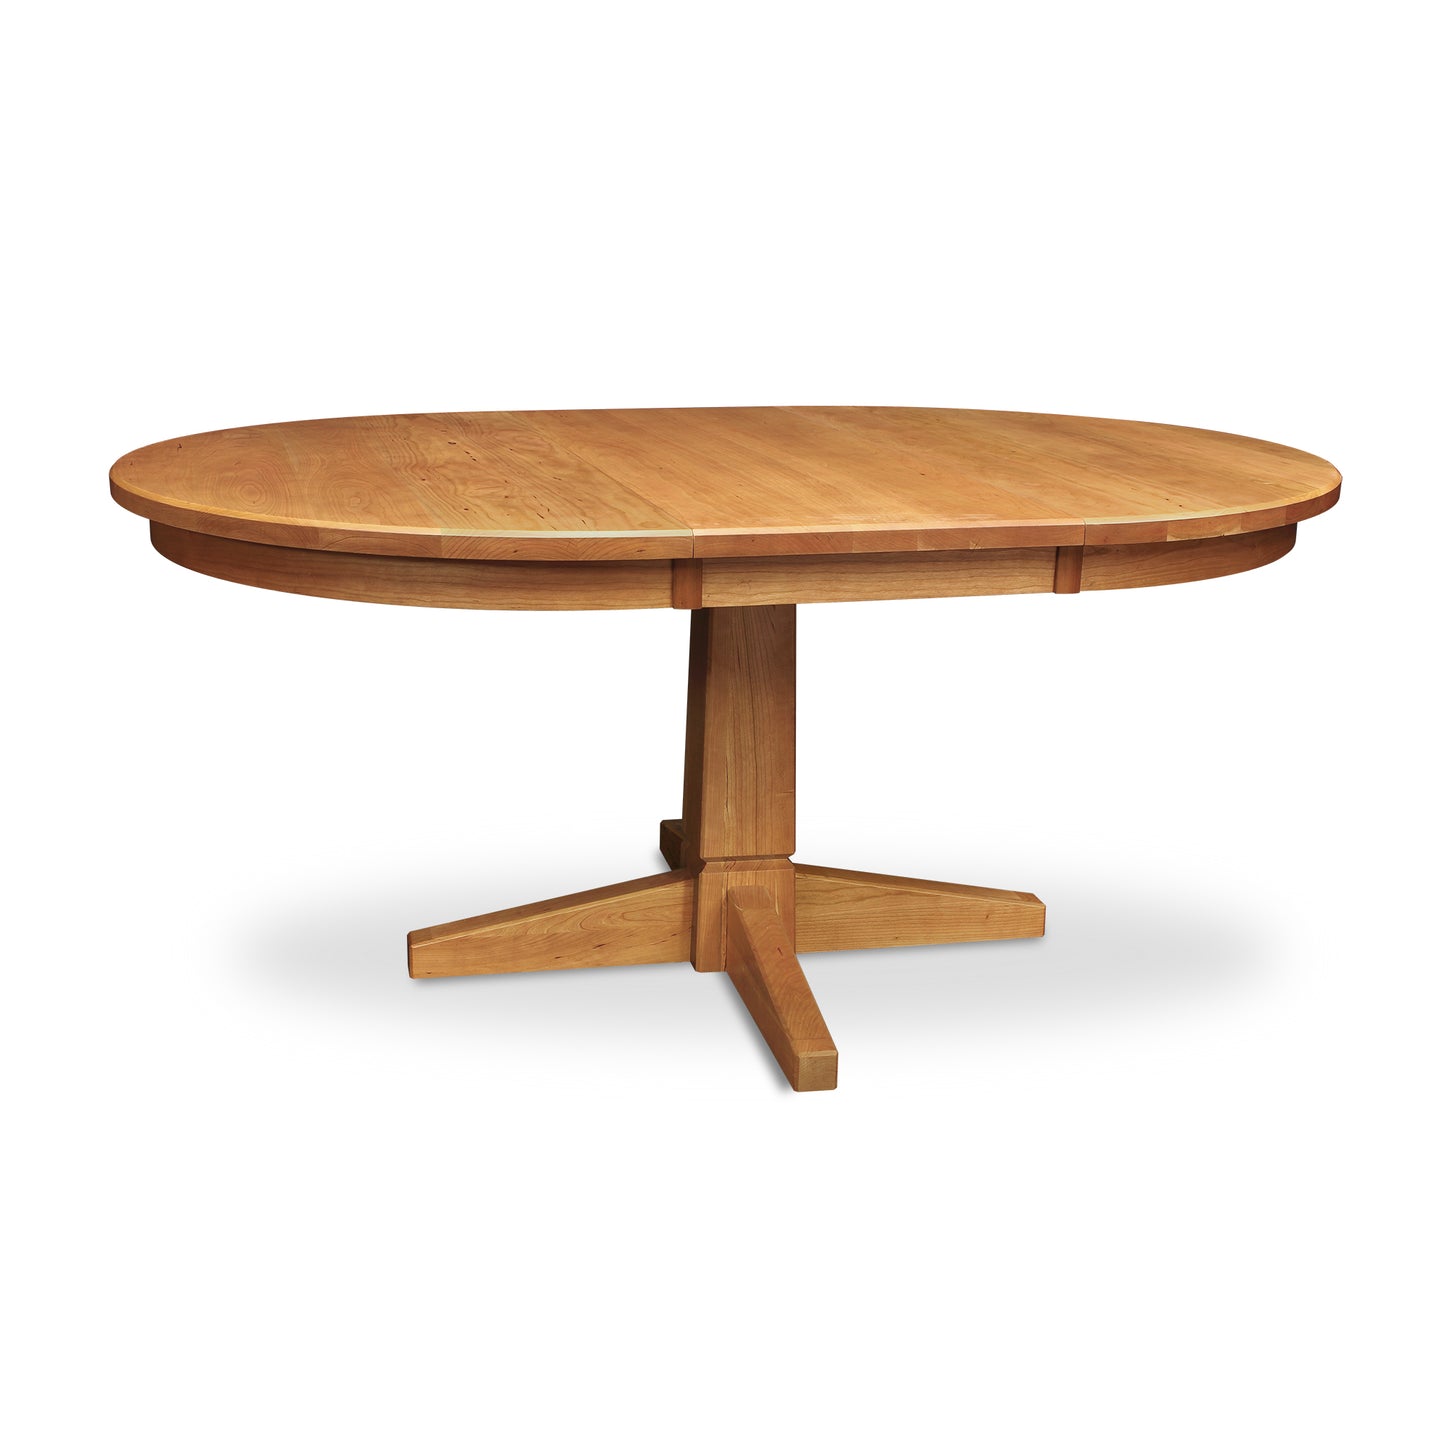 An oval dining table with a Natural Vermont Single Pedestal Round Extension Table from Lyndon Furniture as the base.